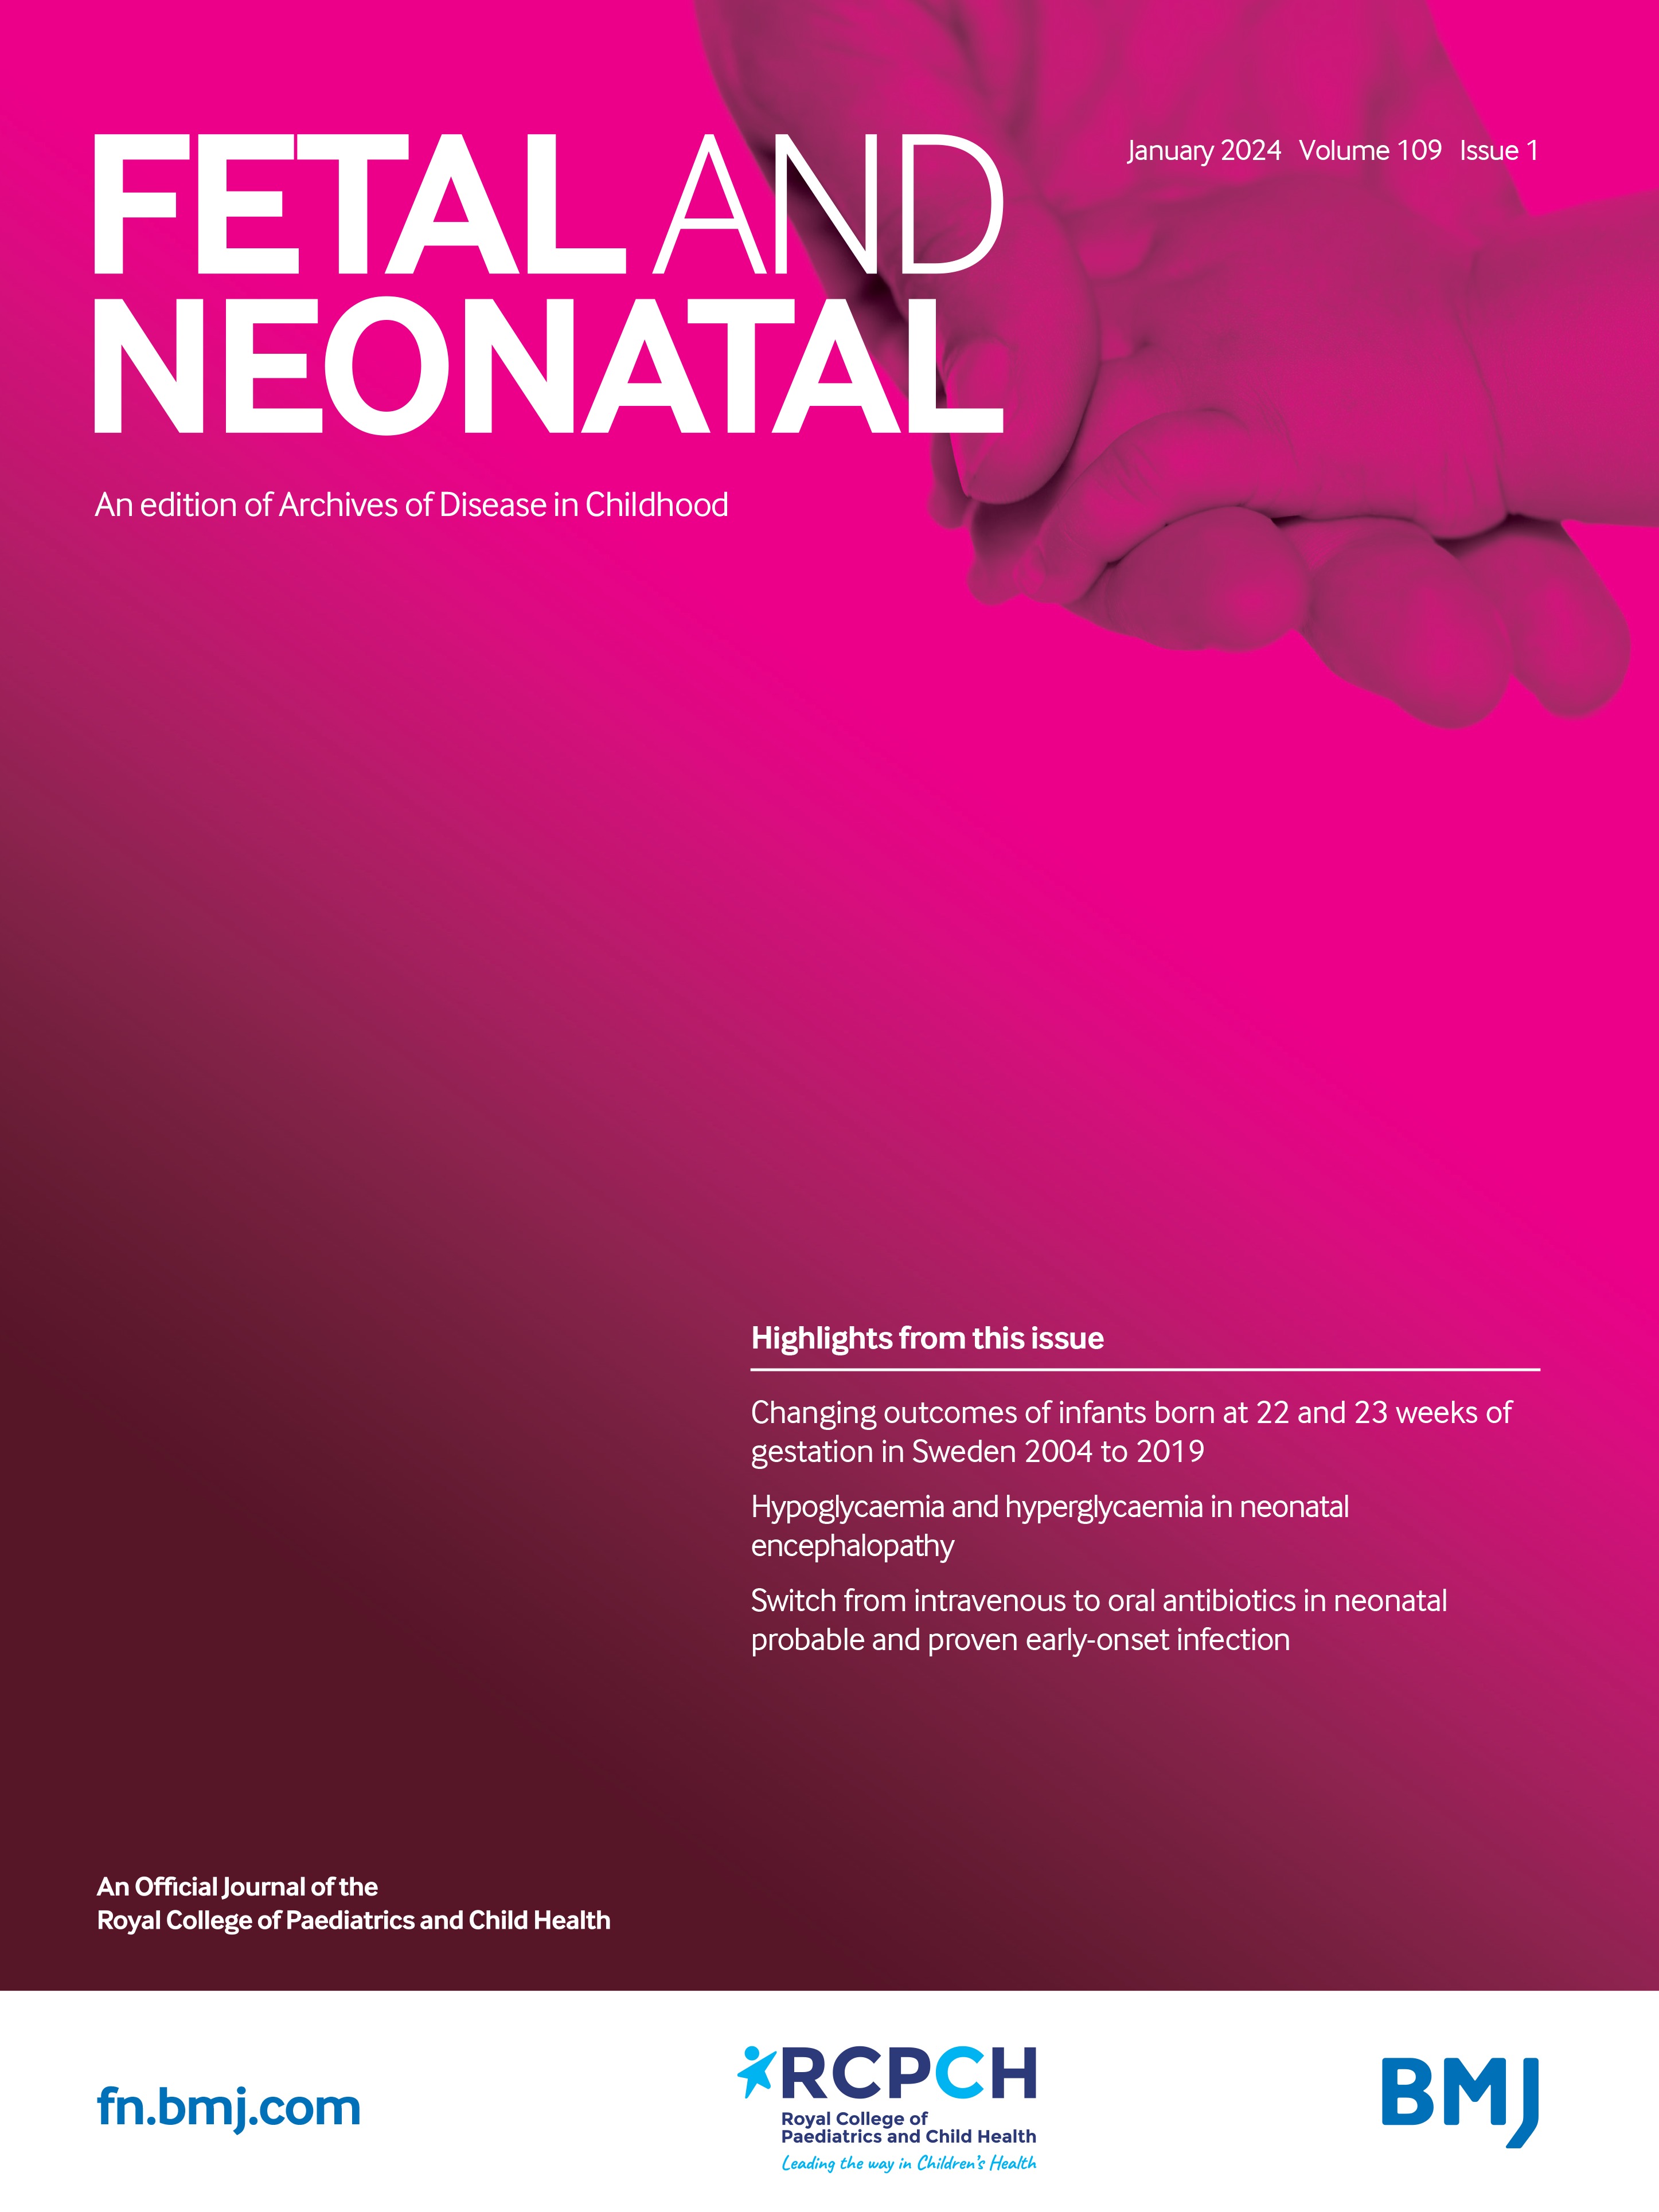 Switch from intravenous-to-oral antibiotics in neonatal probable and proven early-onset infection: a prospective population-based real-life multicentre cohort study